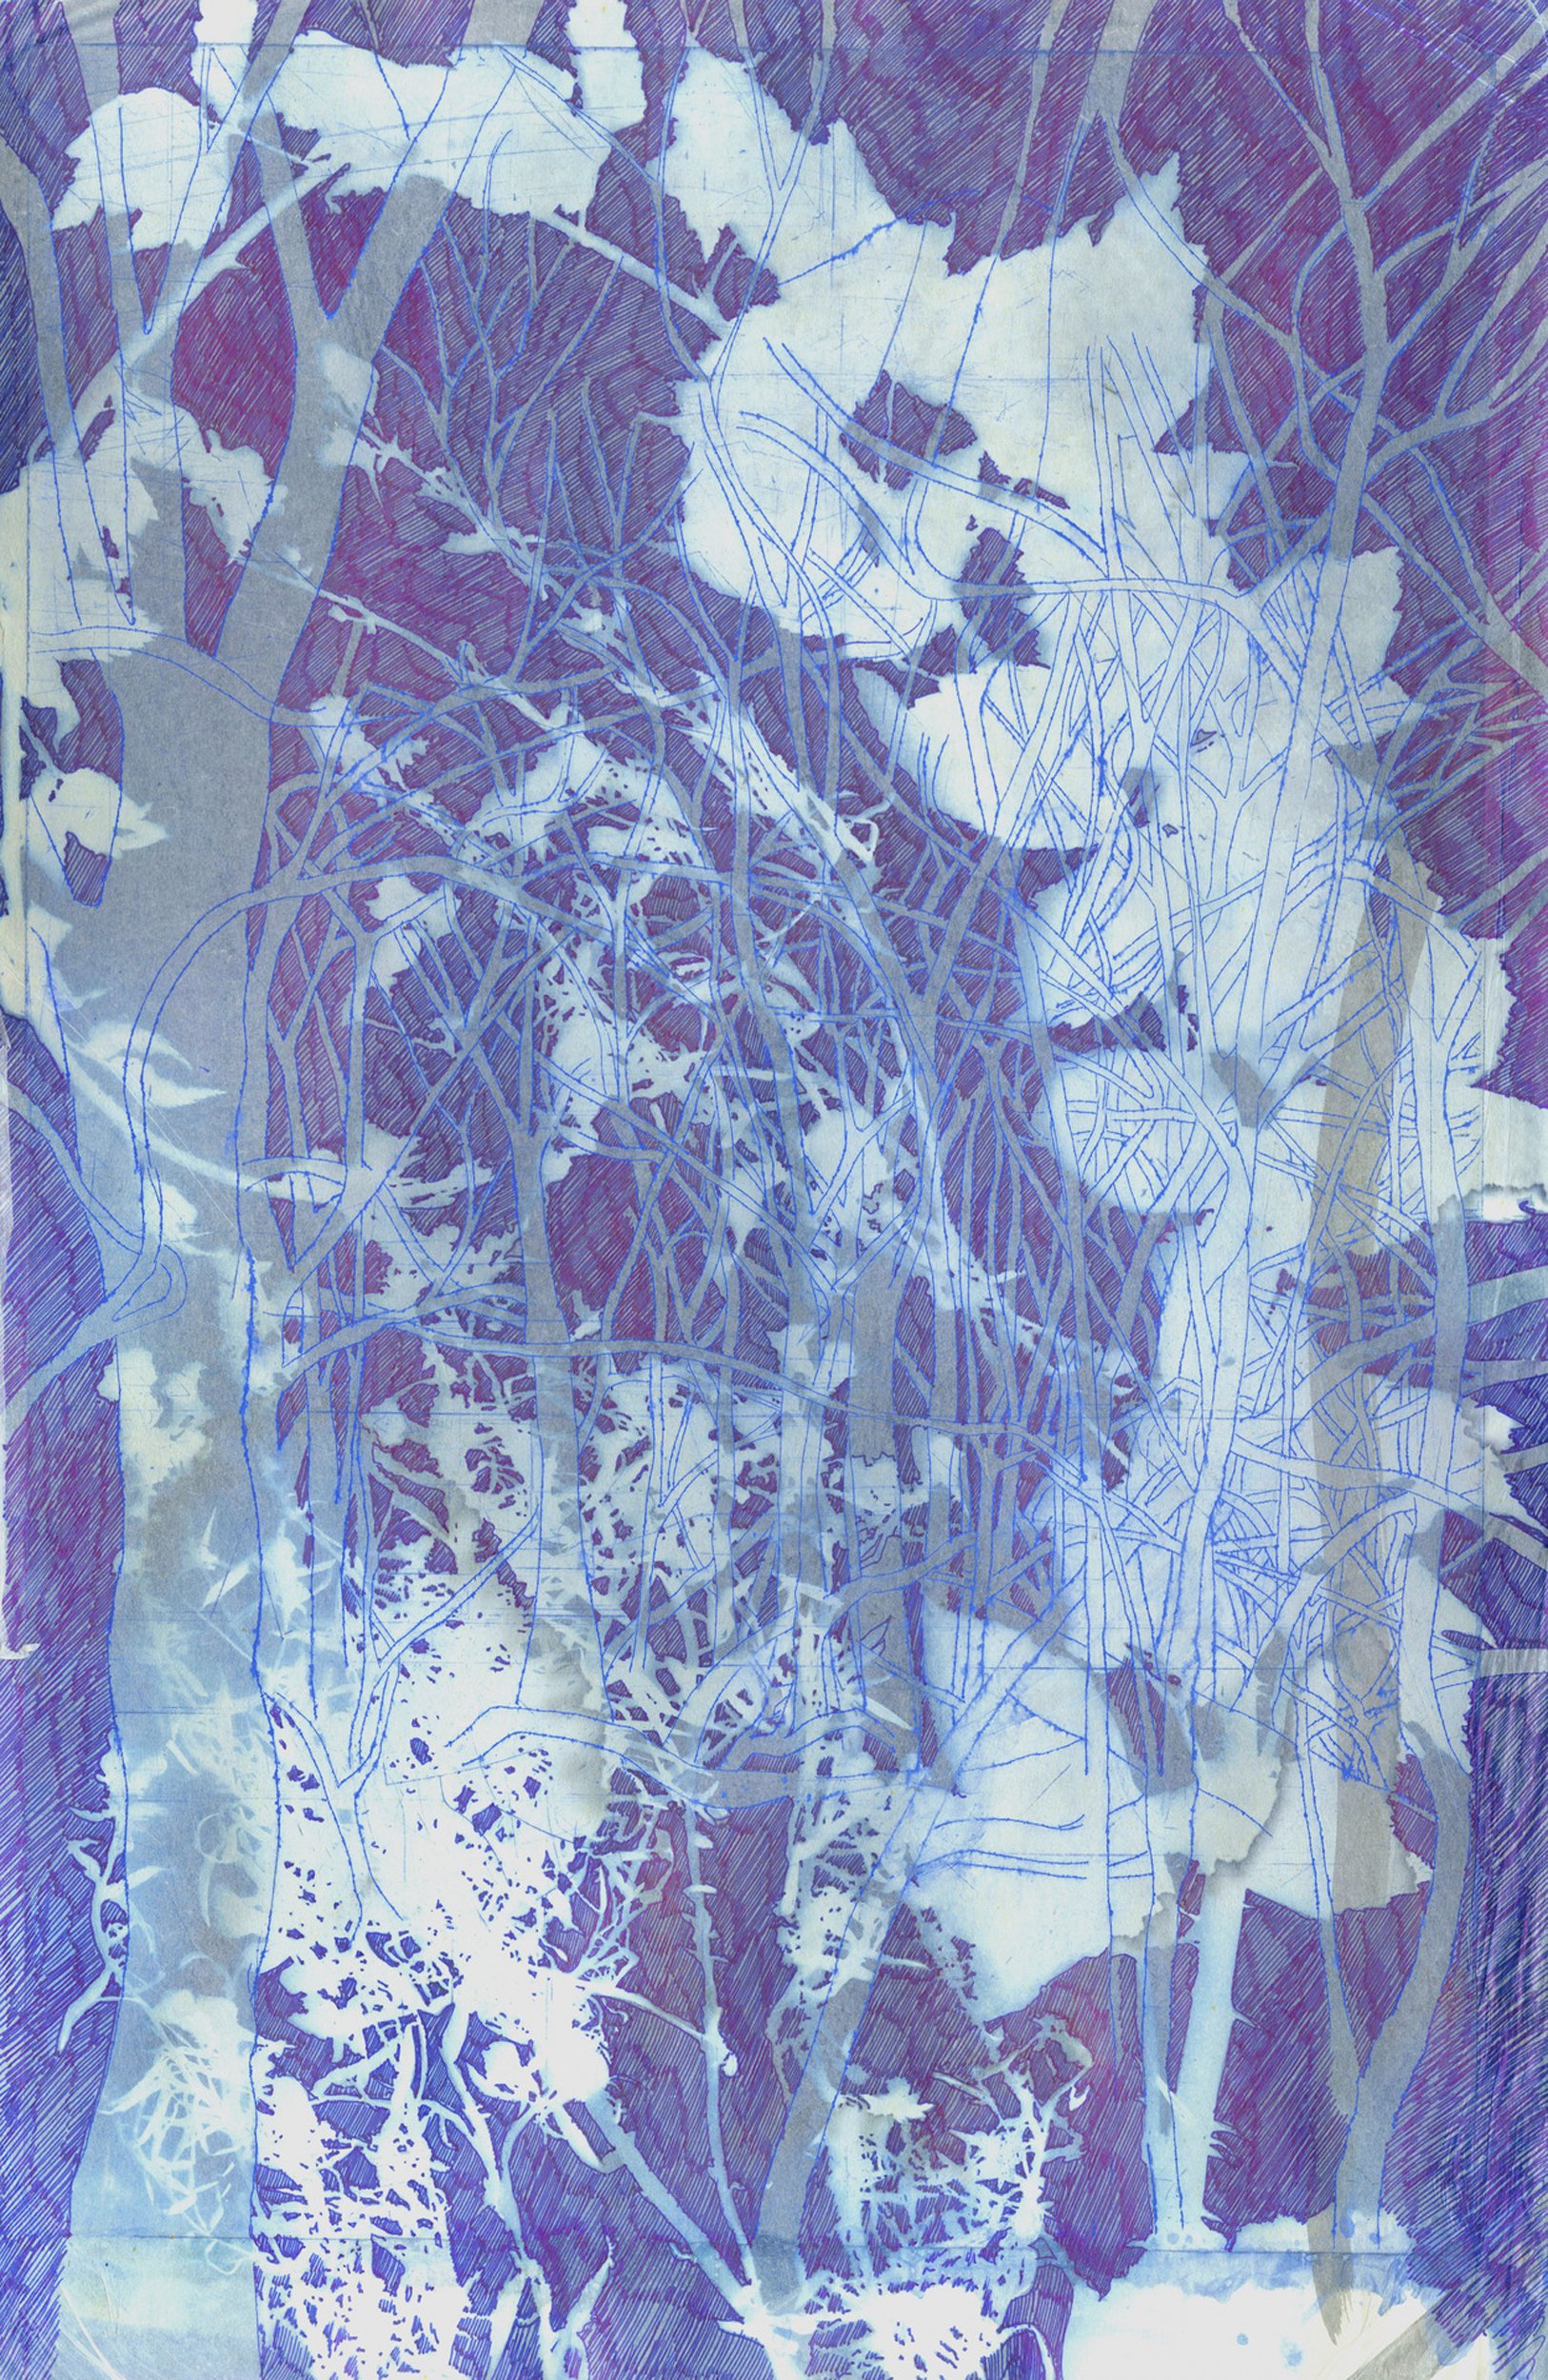  Nicole Simpkins    Being Itself Composed Entirely Of One Single Motive    Cyanotype, intaglio, chine collé, ink drawing 